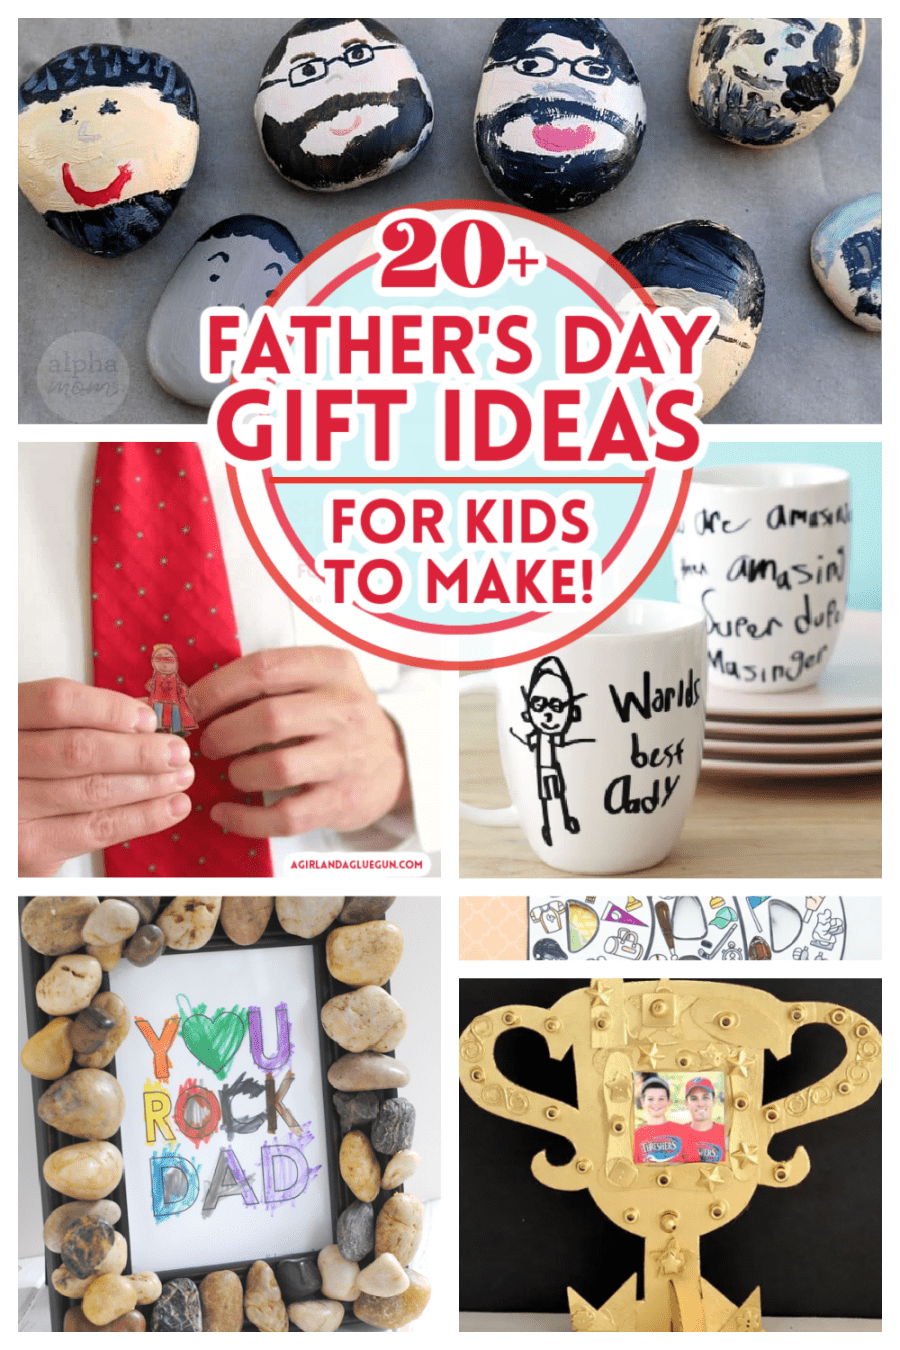 Shop Now: The Ultimate Father's Day Gift Guide | The Everygirl